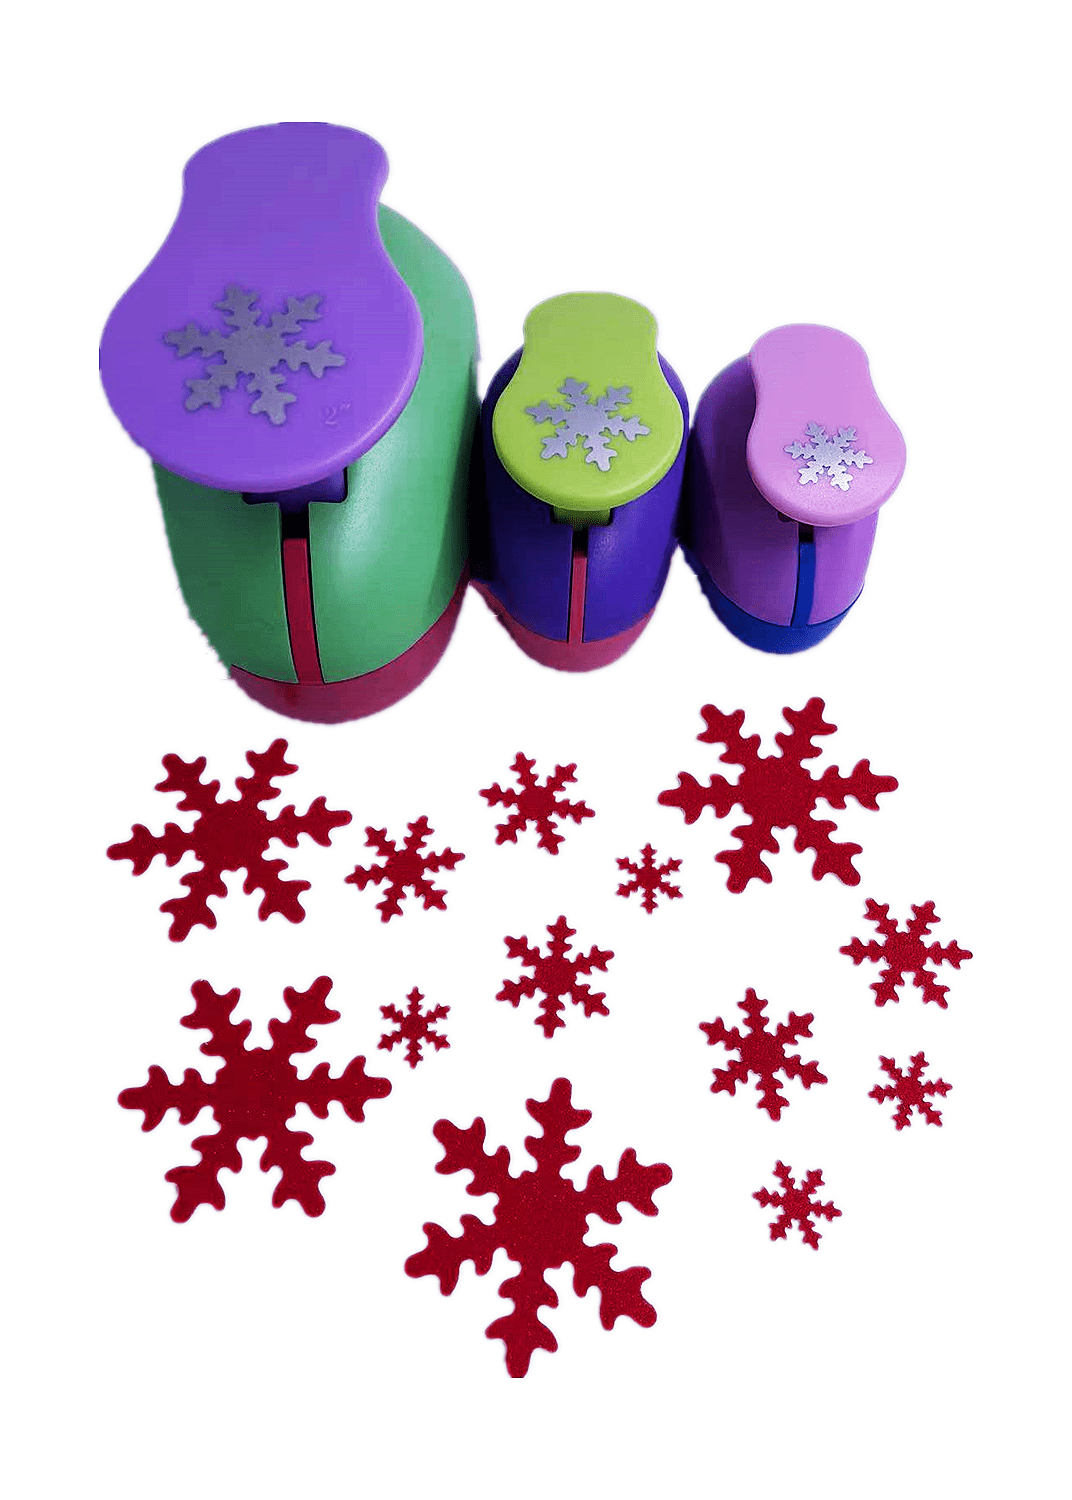 Worldoor 3 PCS (1.5,1,5/8) Snowflake Shape Craft Punch Scrapbook Paper  Cutter Eva Foam Hole Punch Tool for Christmas Party Arts Crafts Decorations